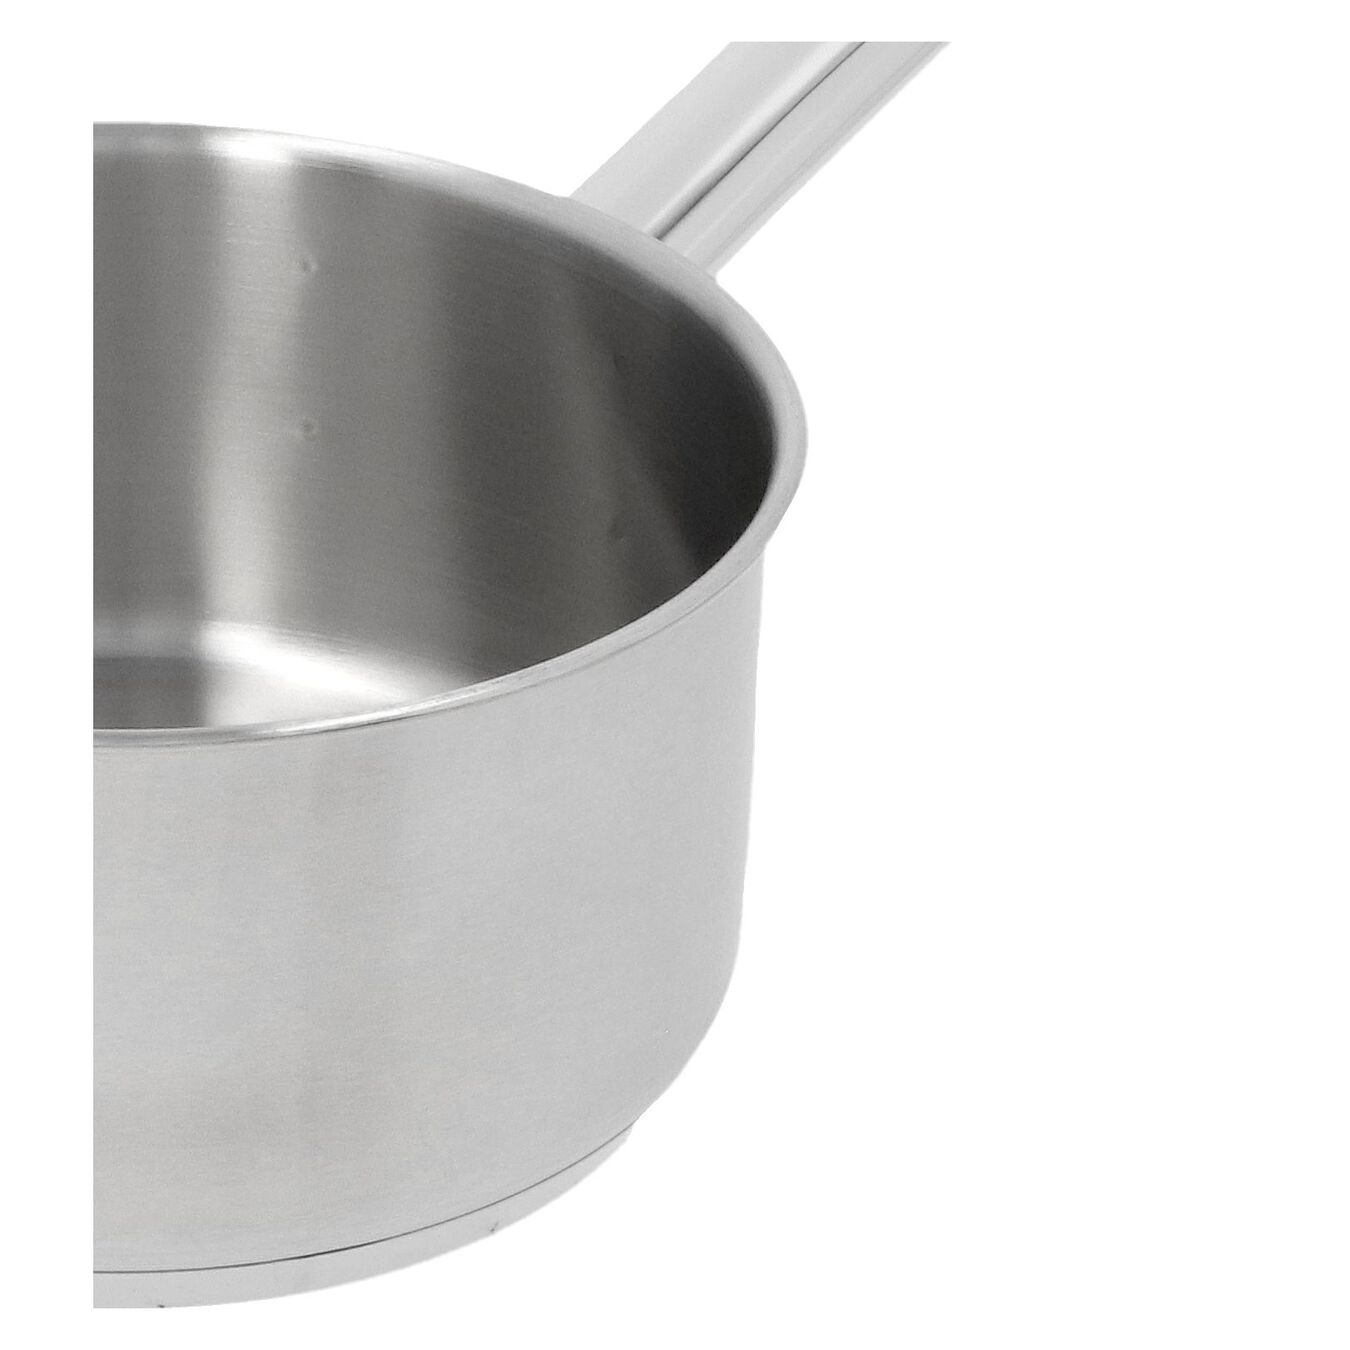 16 cm 18/10 Stainless Steel Saucepan with lid silver,,large 5